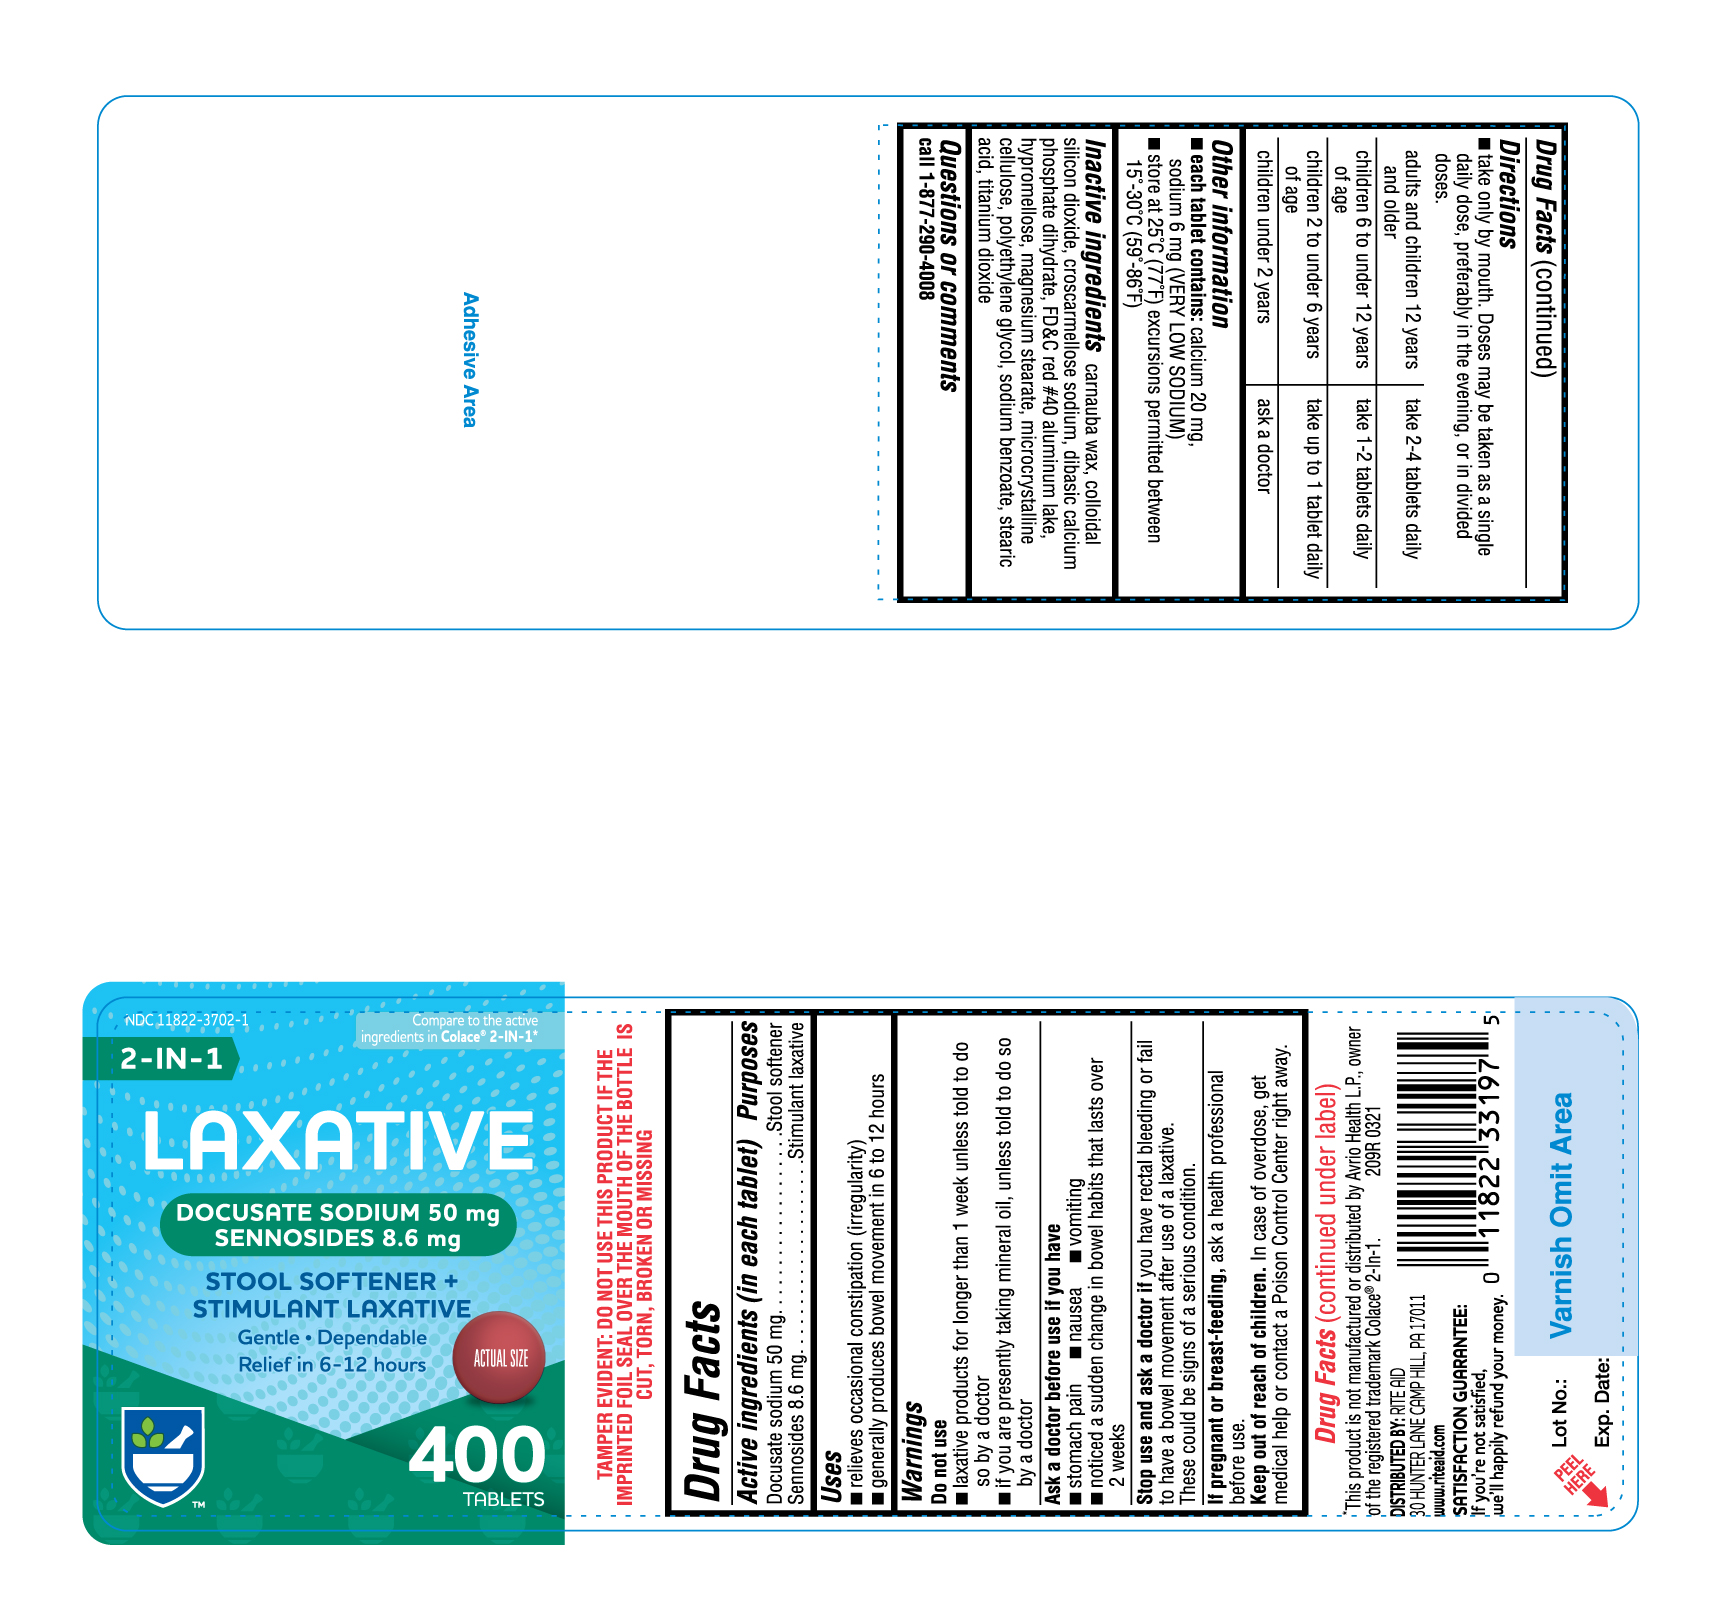 209R-Rite Aid-Laxative Tablets-bottle label-400s